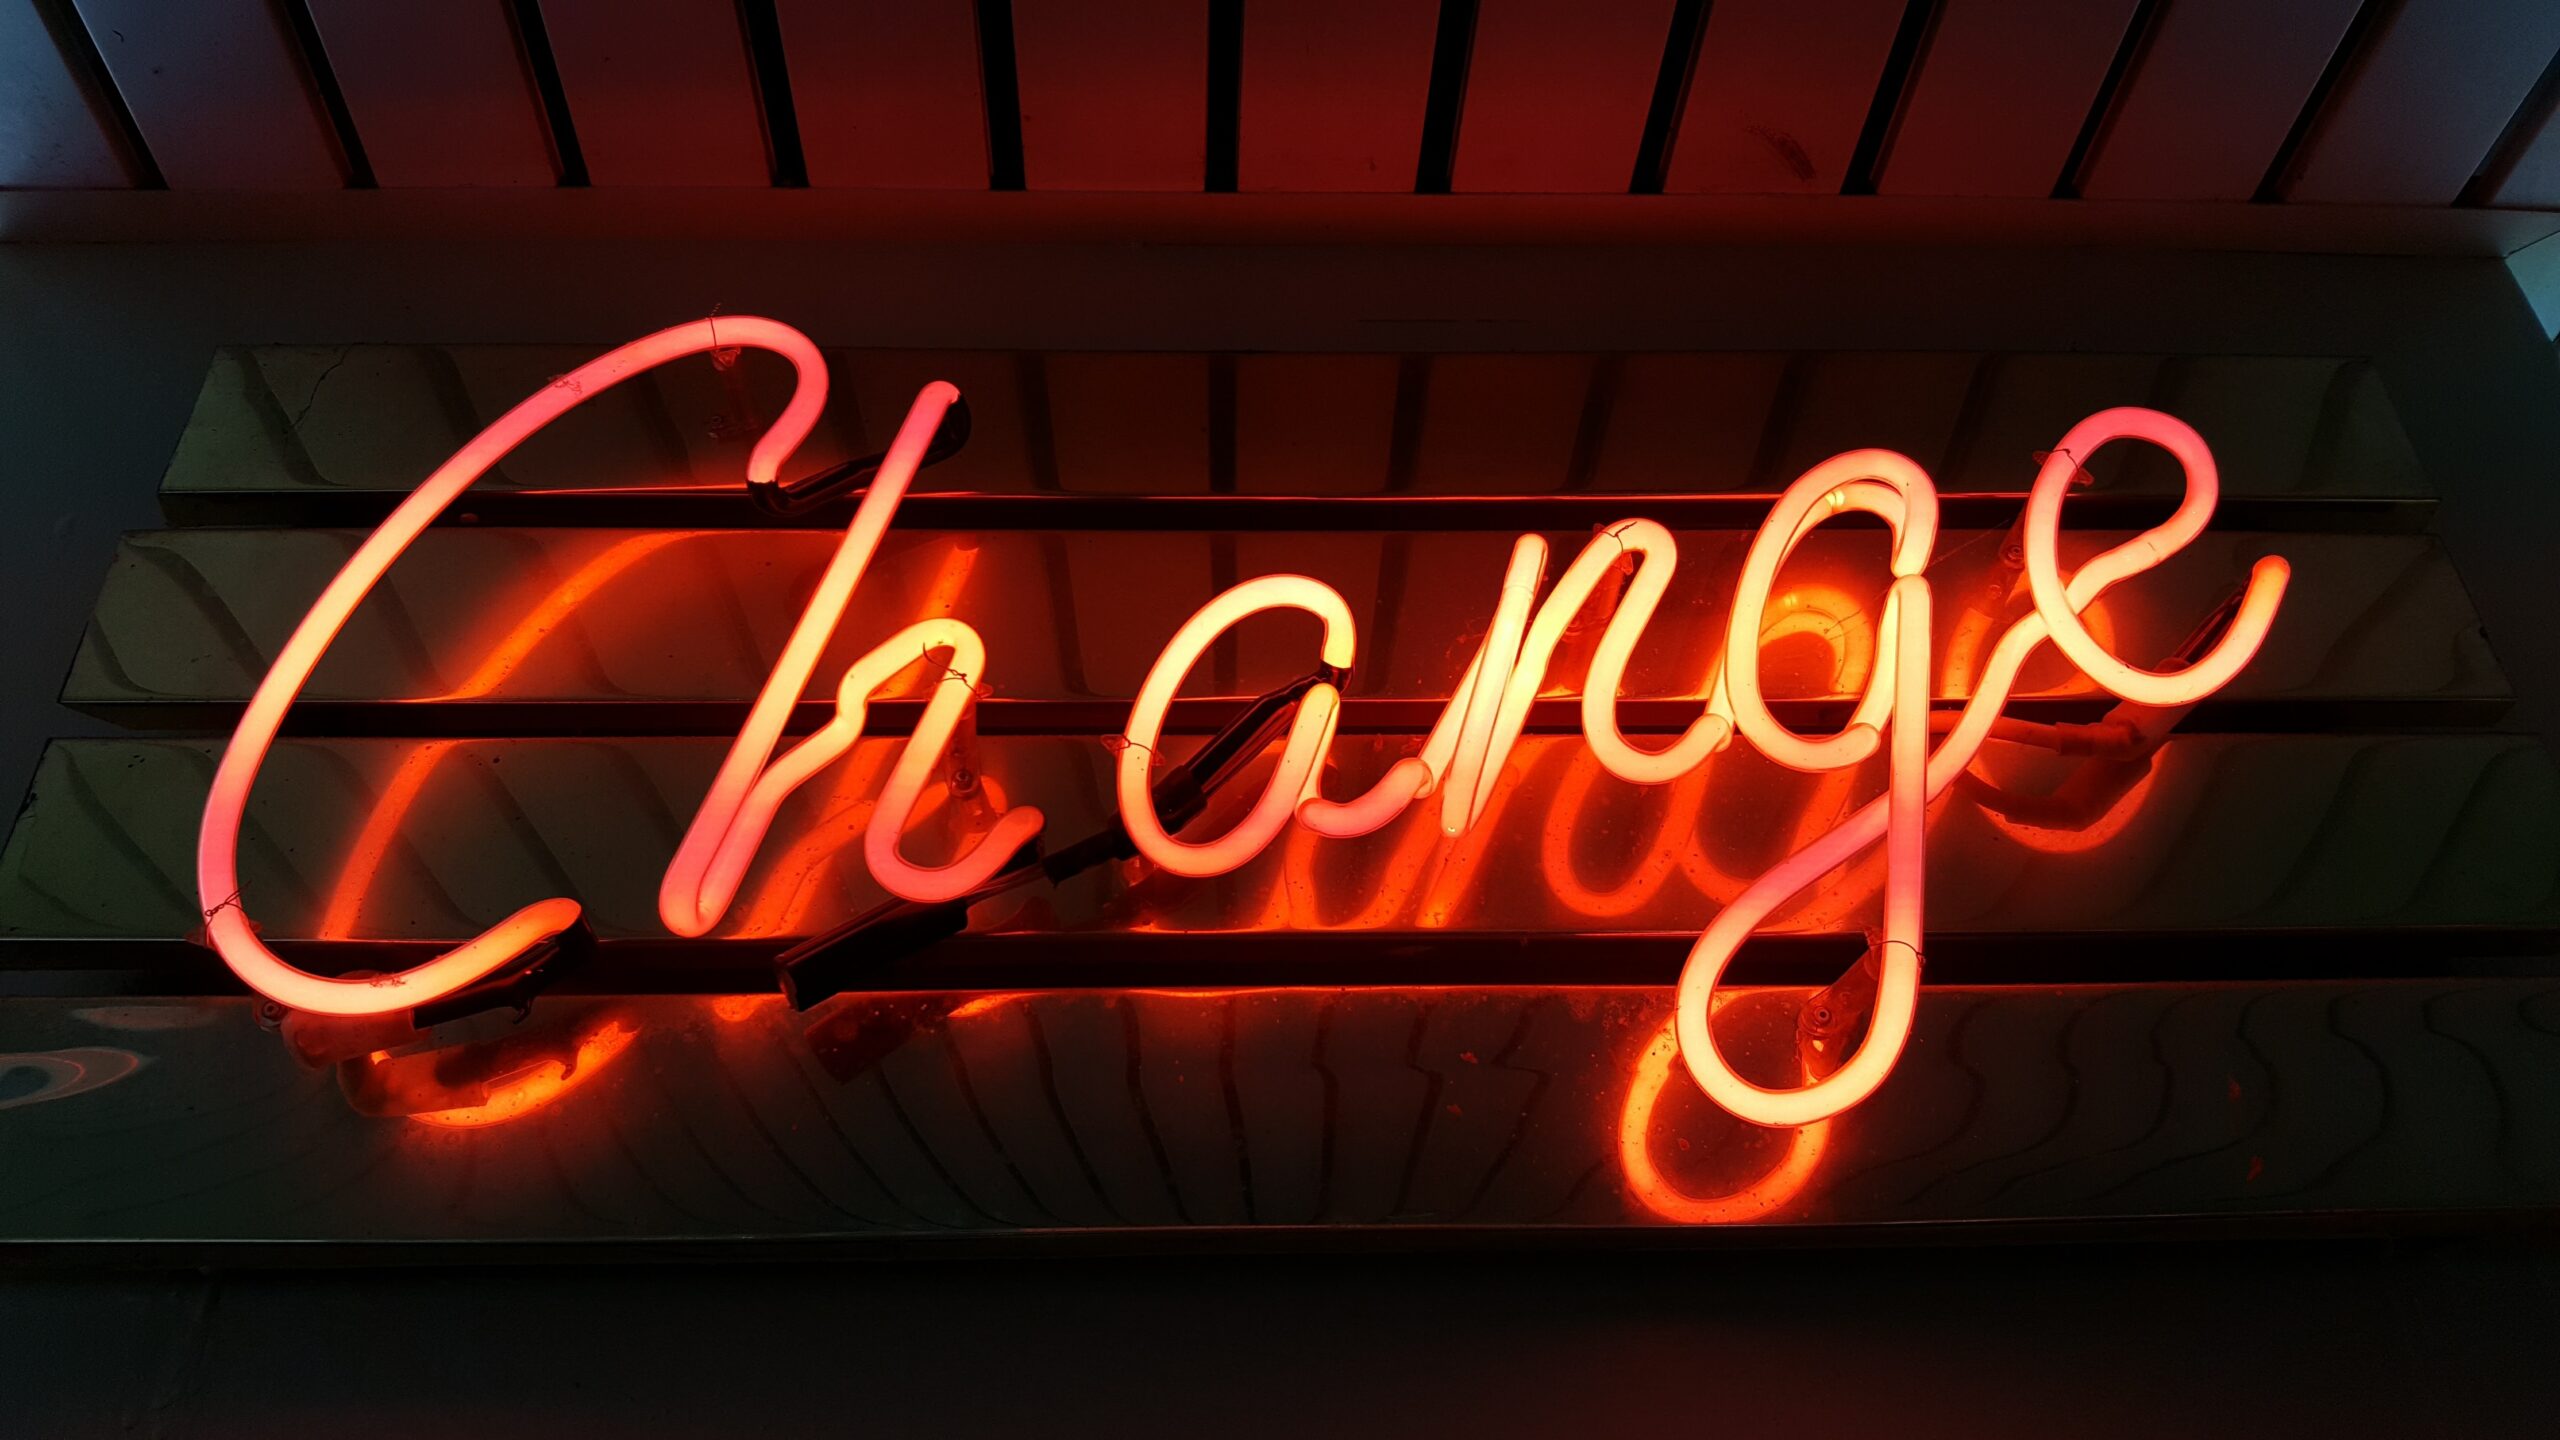 Neon sign showing change that allows a person to change